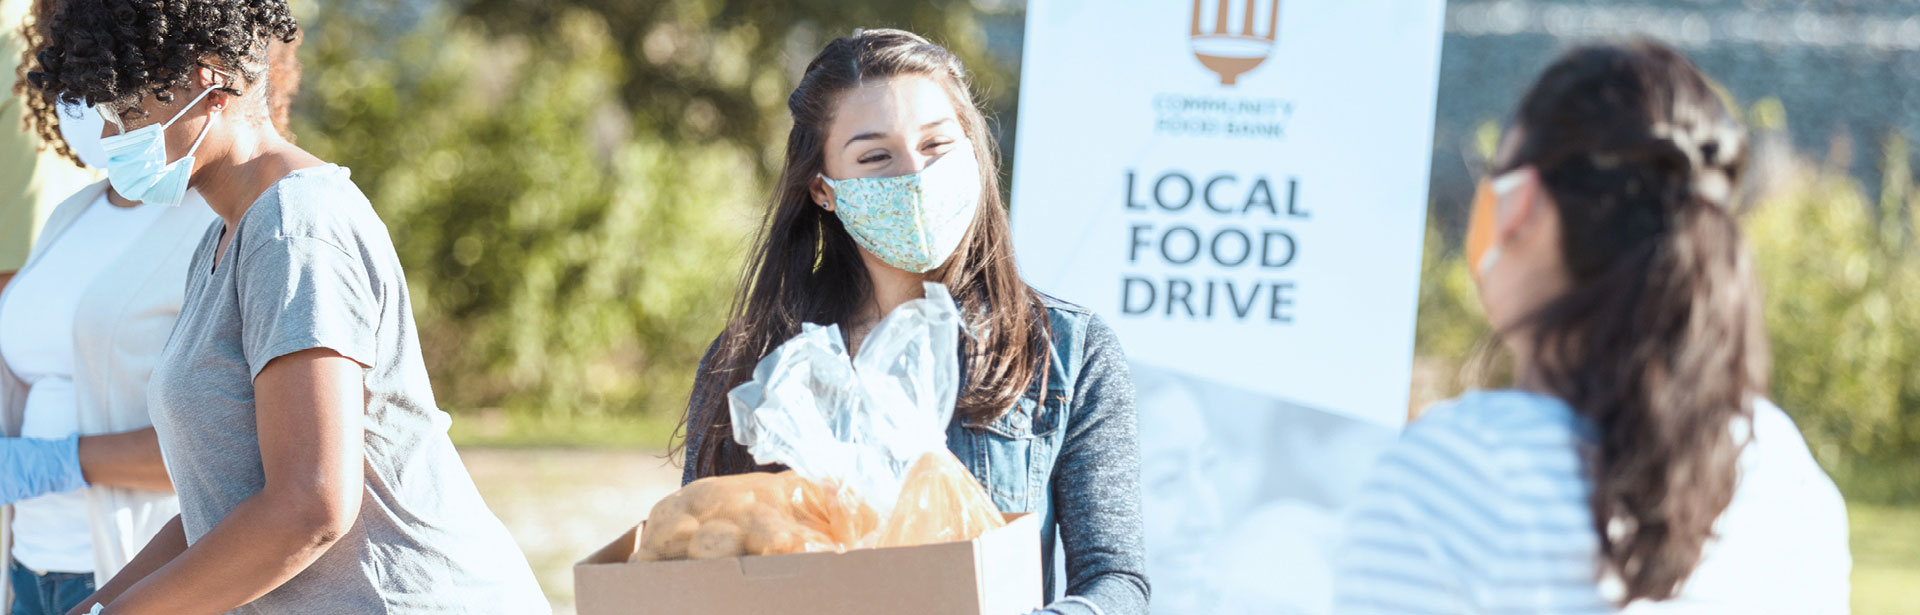 Happy patrons at a local food drive carrying bread